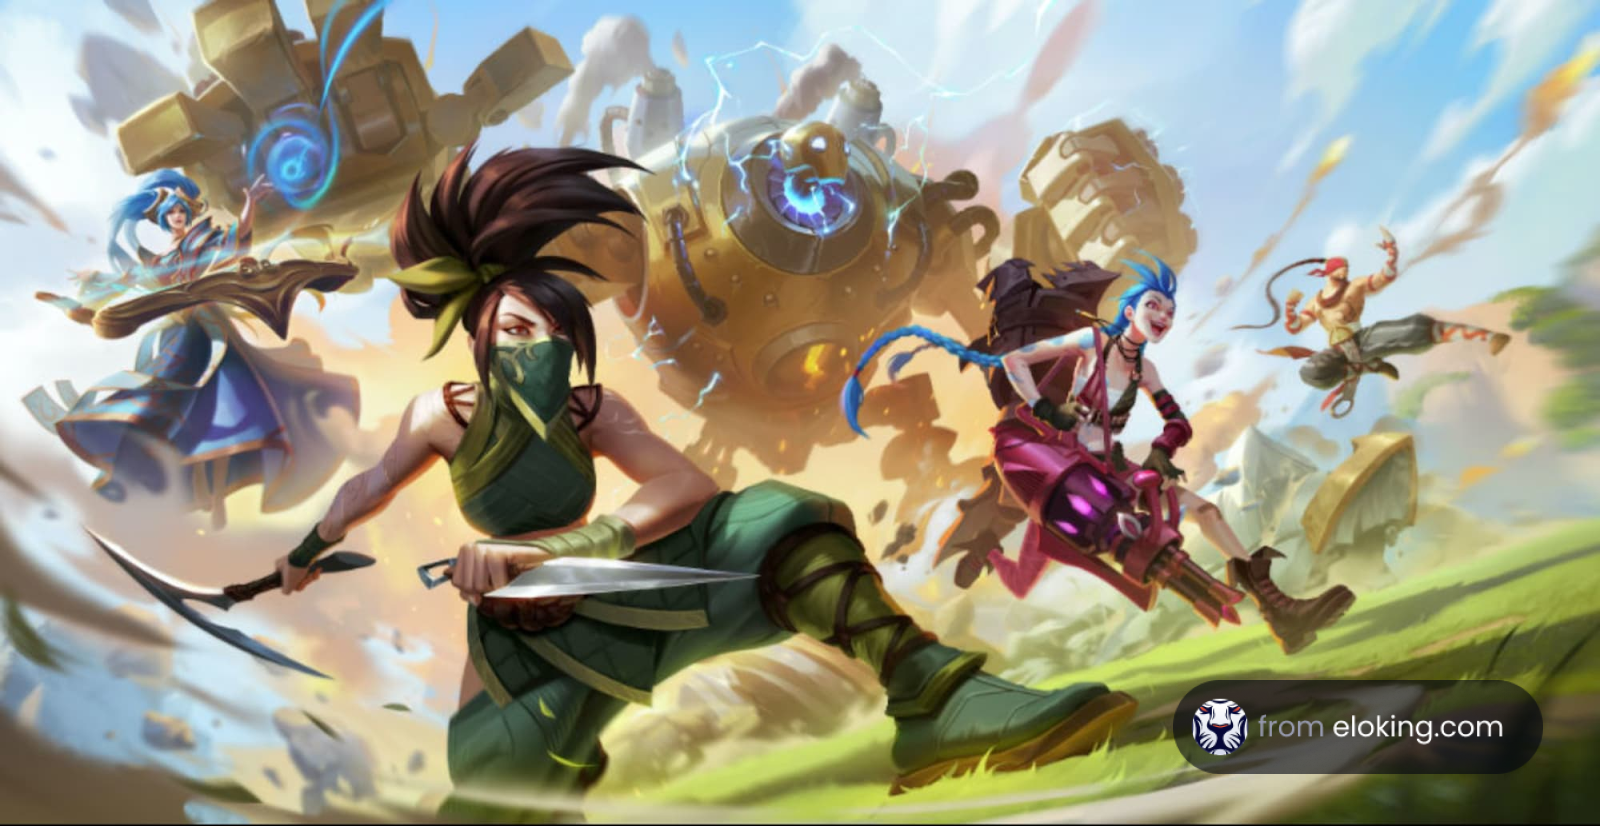 Dynamic fantasy battle scene with multiple characters engaged in combat